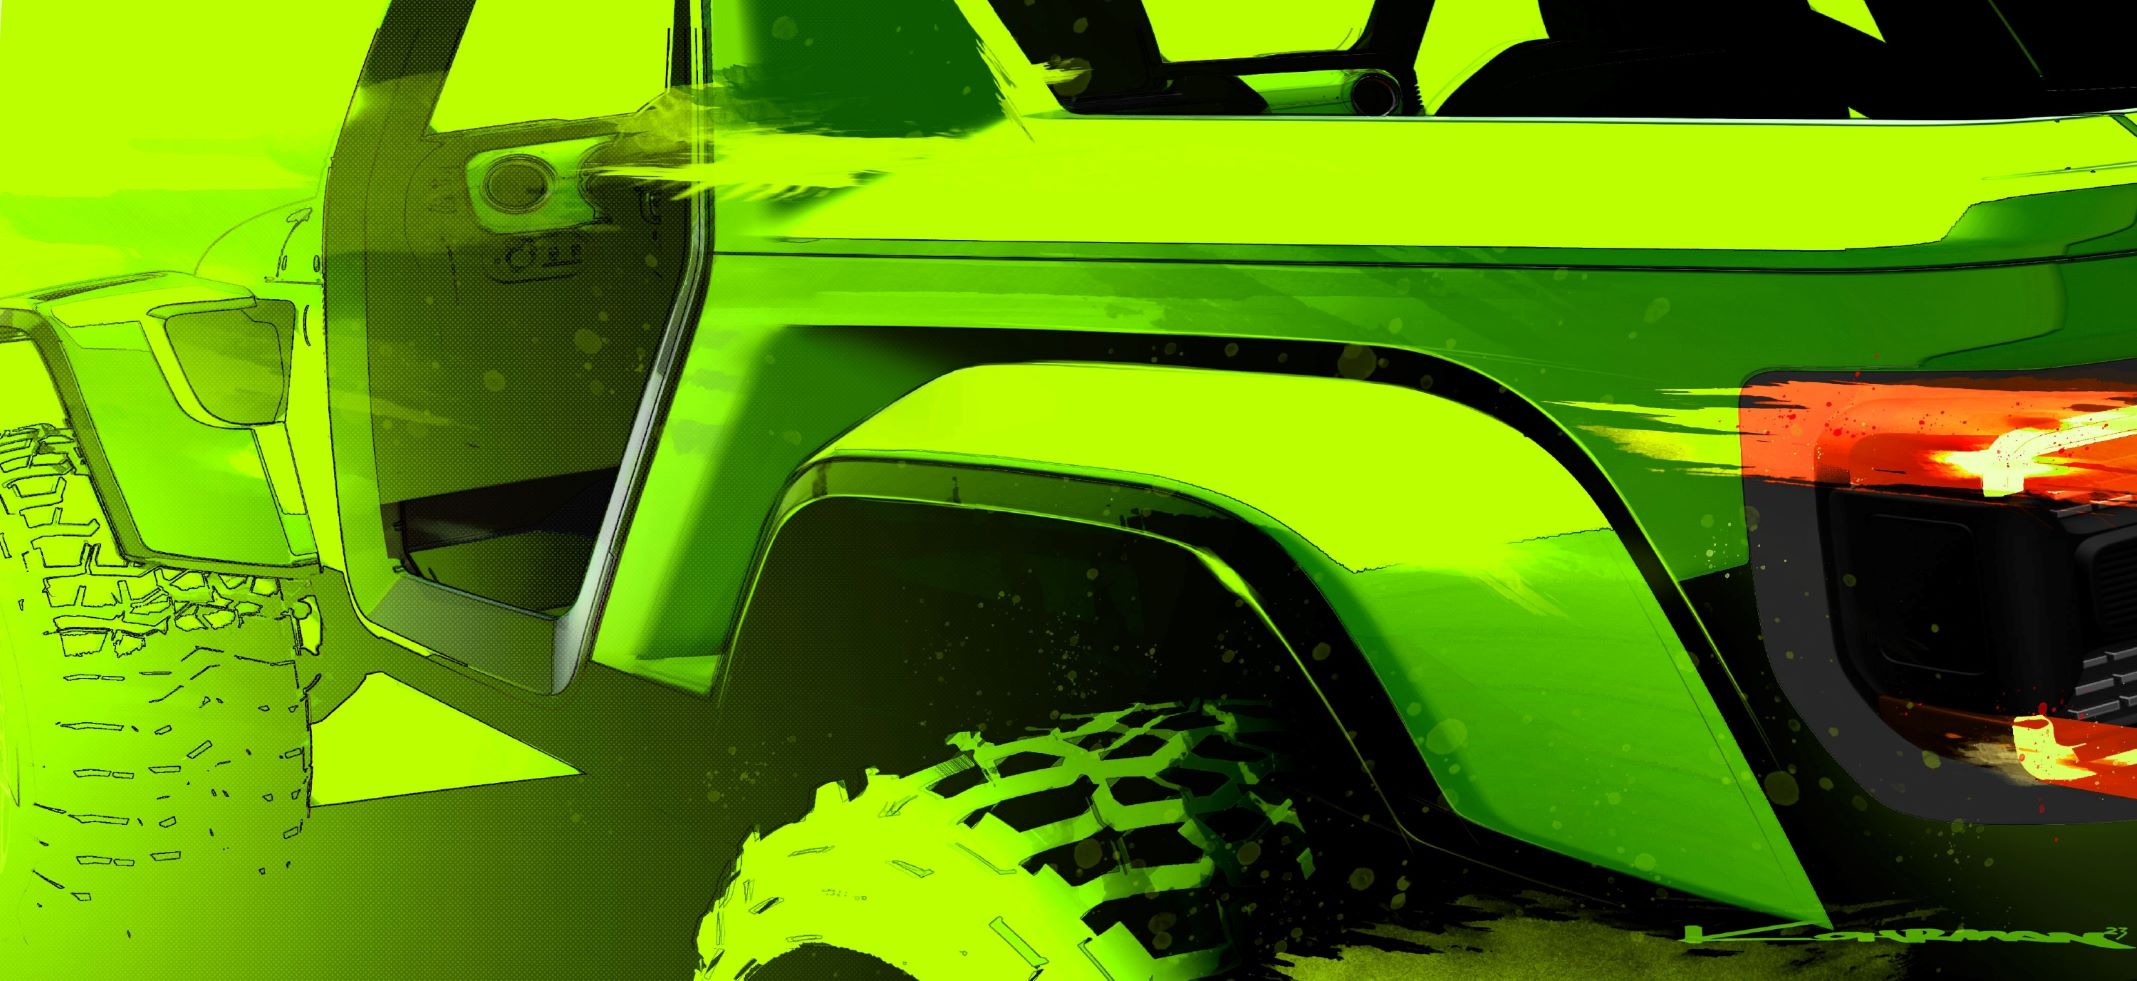 A teaser of a wild Jeep concept that will be displayed at the Annual Easter Jeep Safari